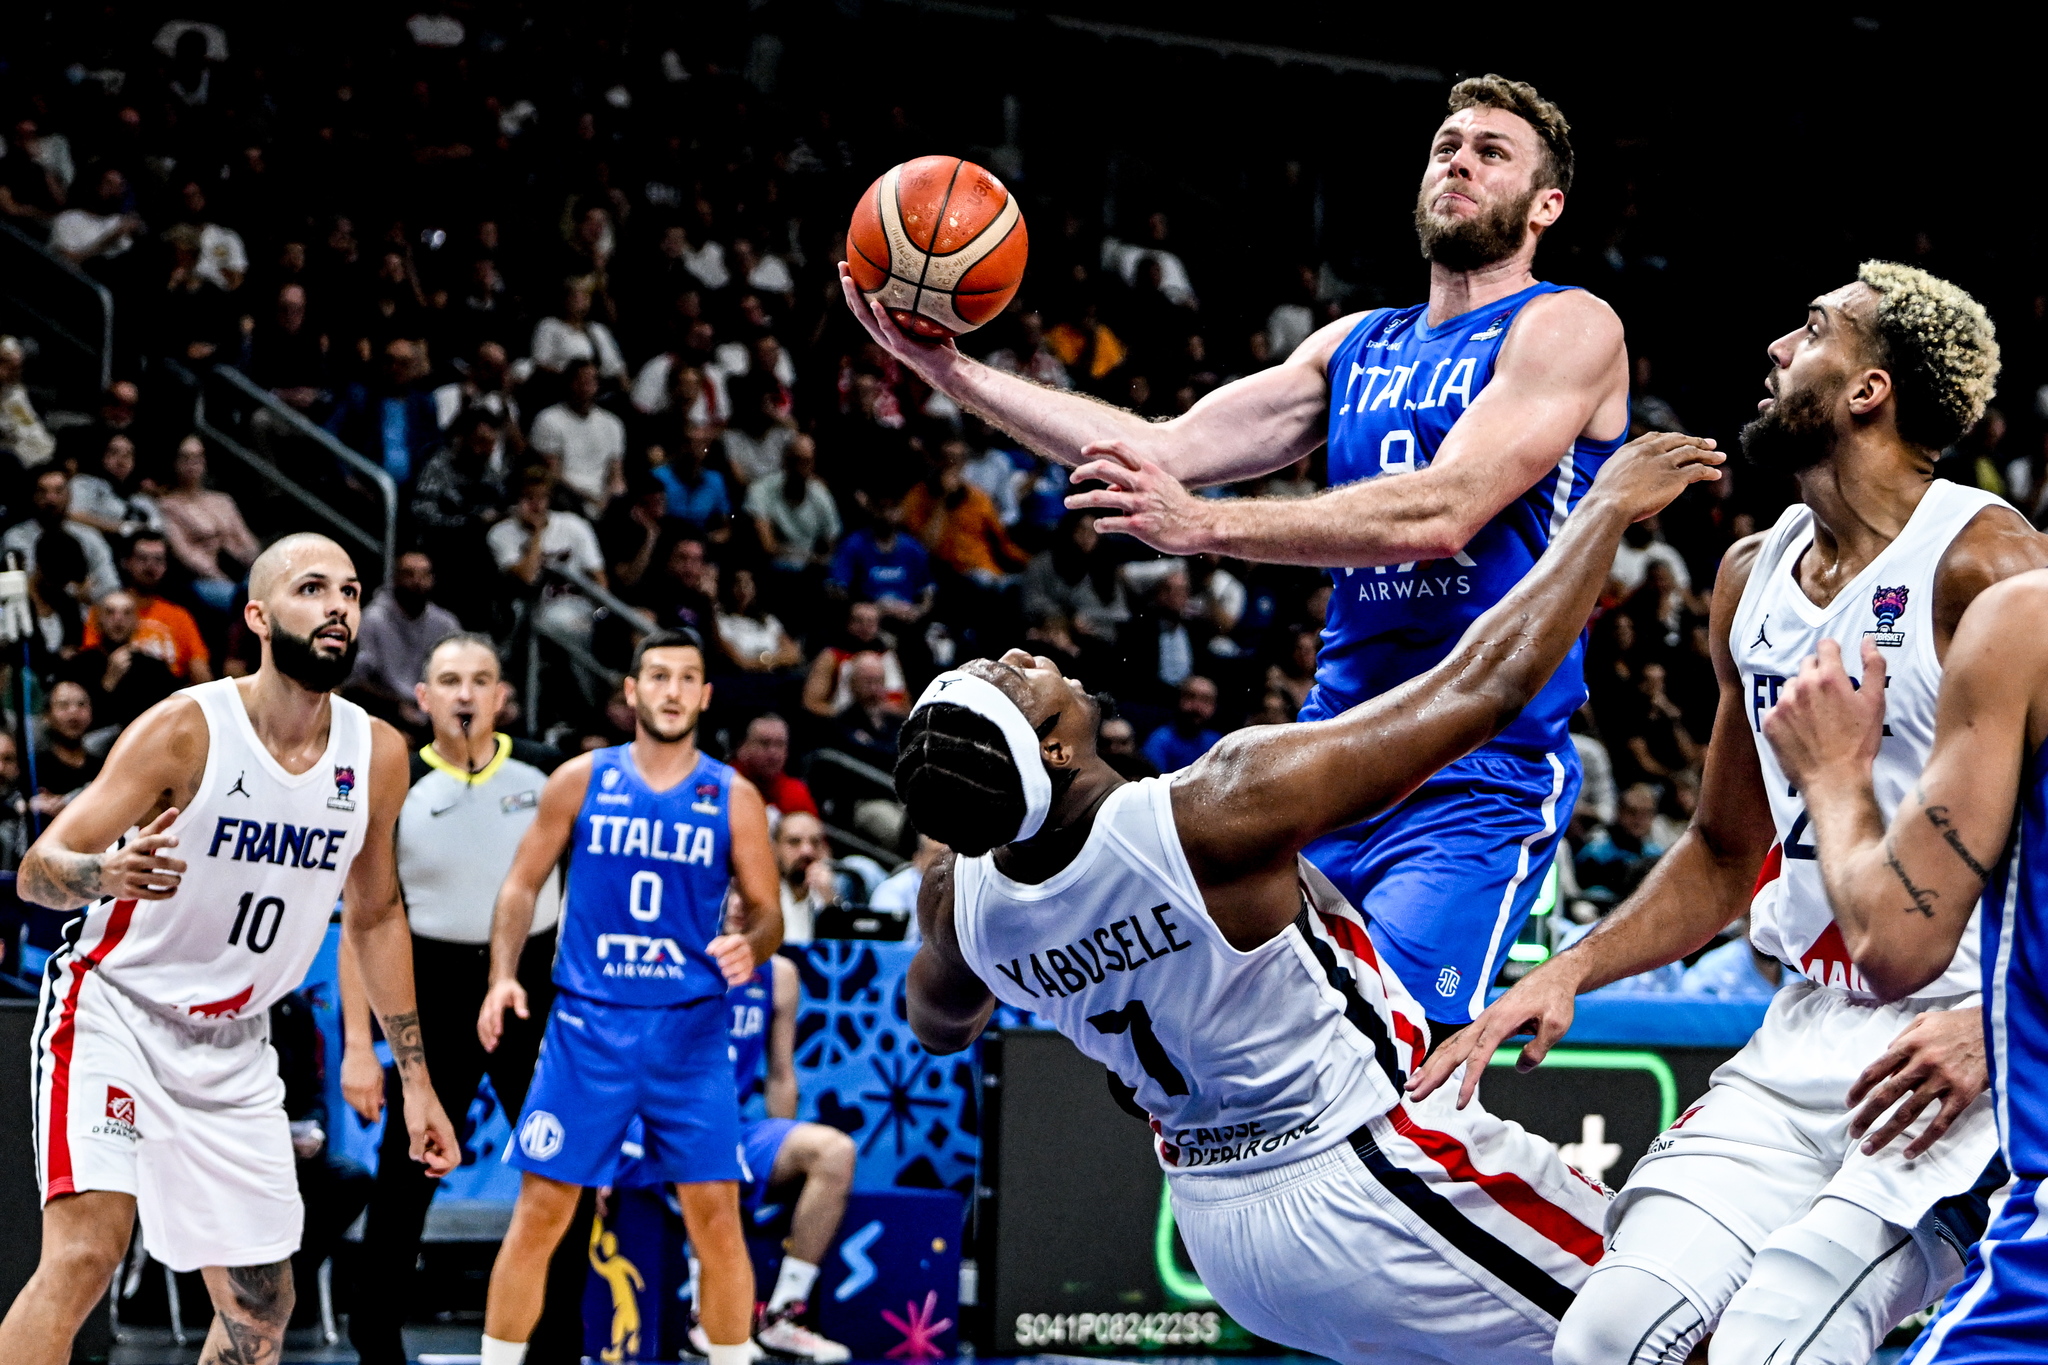  lt;HIT gt;Berlin lt;/HIT gt; (Germany), 14/09/2022.- Nicolo Melli of Italy (2nd-R) in action against Guerschon Yabusele (C) of France during the FIBA EuroBasket 2022 Quarter Finals match between Italy and France at EuroBasket Arena in  lt;HIT gt;Berlin lt;/HIT gt;, Germany, 14 September 2022. (Baloncesto, Francia, Alemania, Italia) EFE/EPA/FILIP SINGER